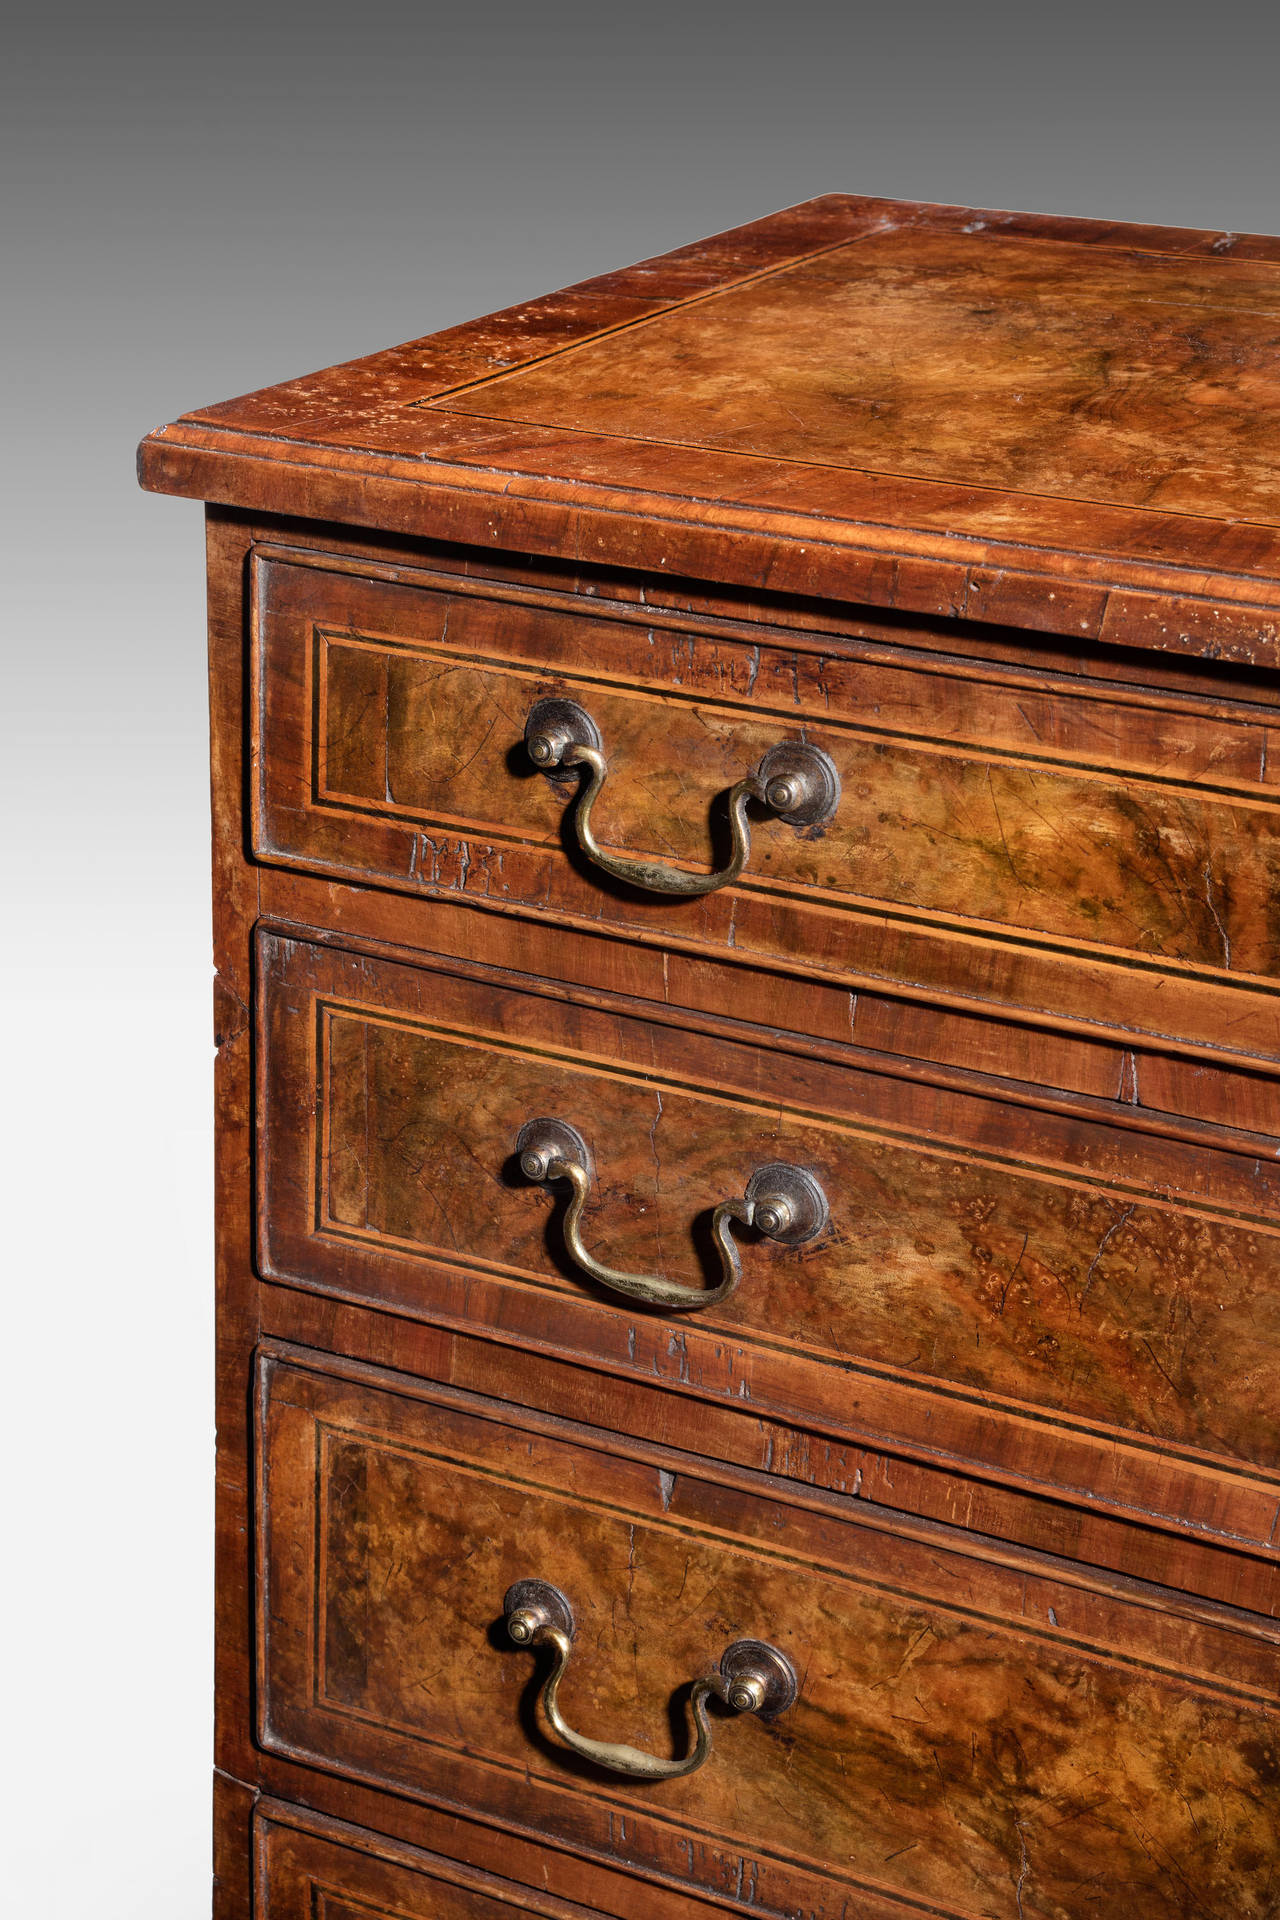 Great Britain (UK) Mid-18th Century North Country Walnut Chest of Drawers